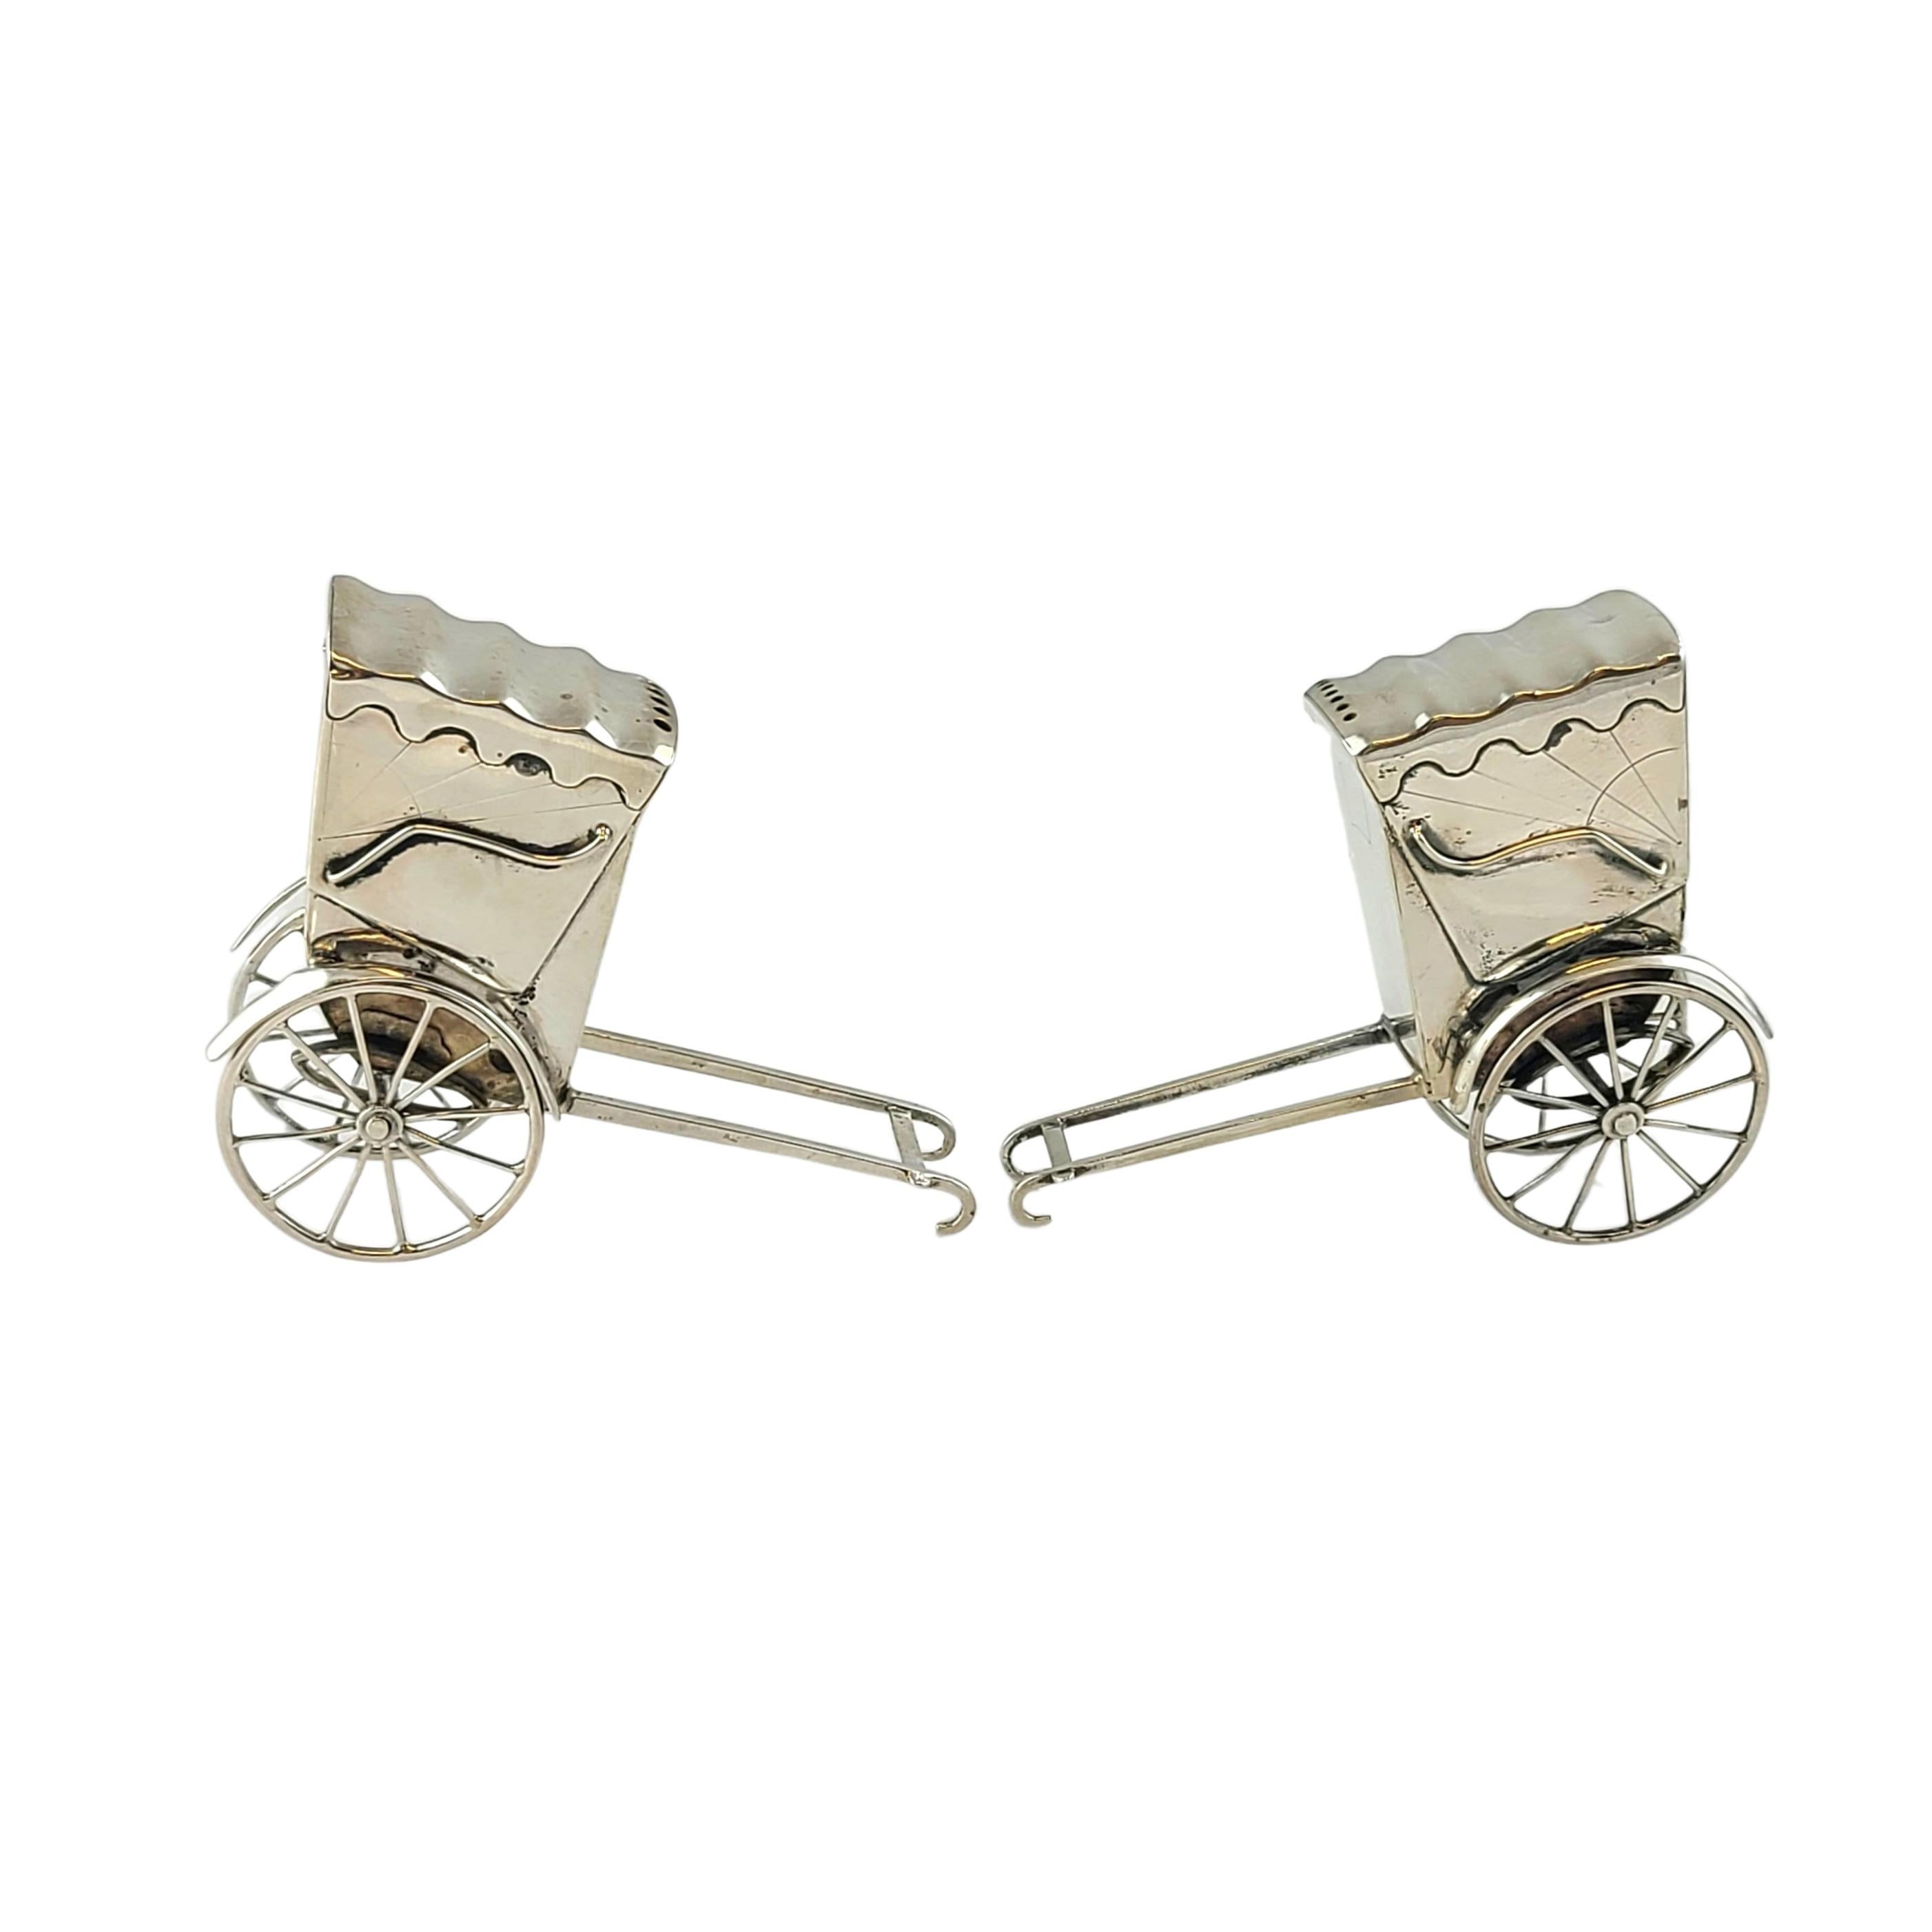 950 sterling silver rickshaw cart salt and pepper shakers from Japan.

Pair of rickshaw shaped salt and pepper shakers with working wheels and an etched sun design. A sliding door to fill with salt and pepper on the back of the cart.

Measures